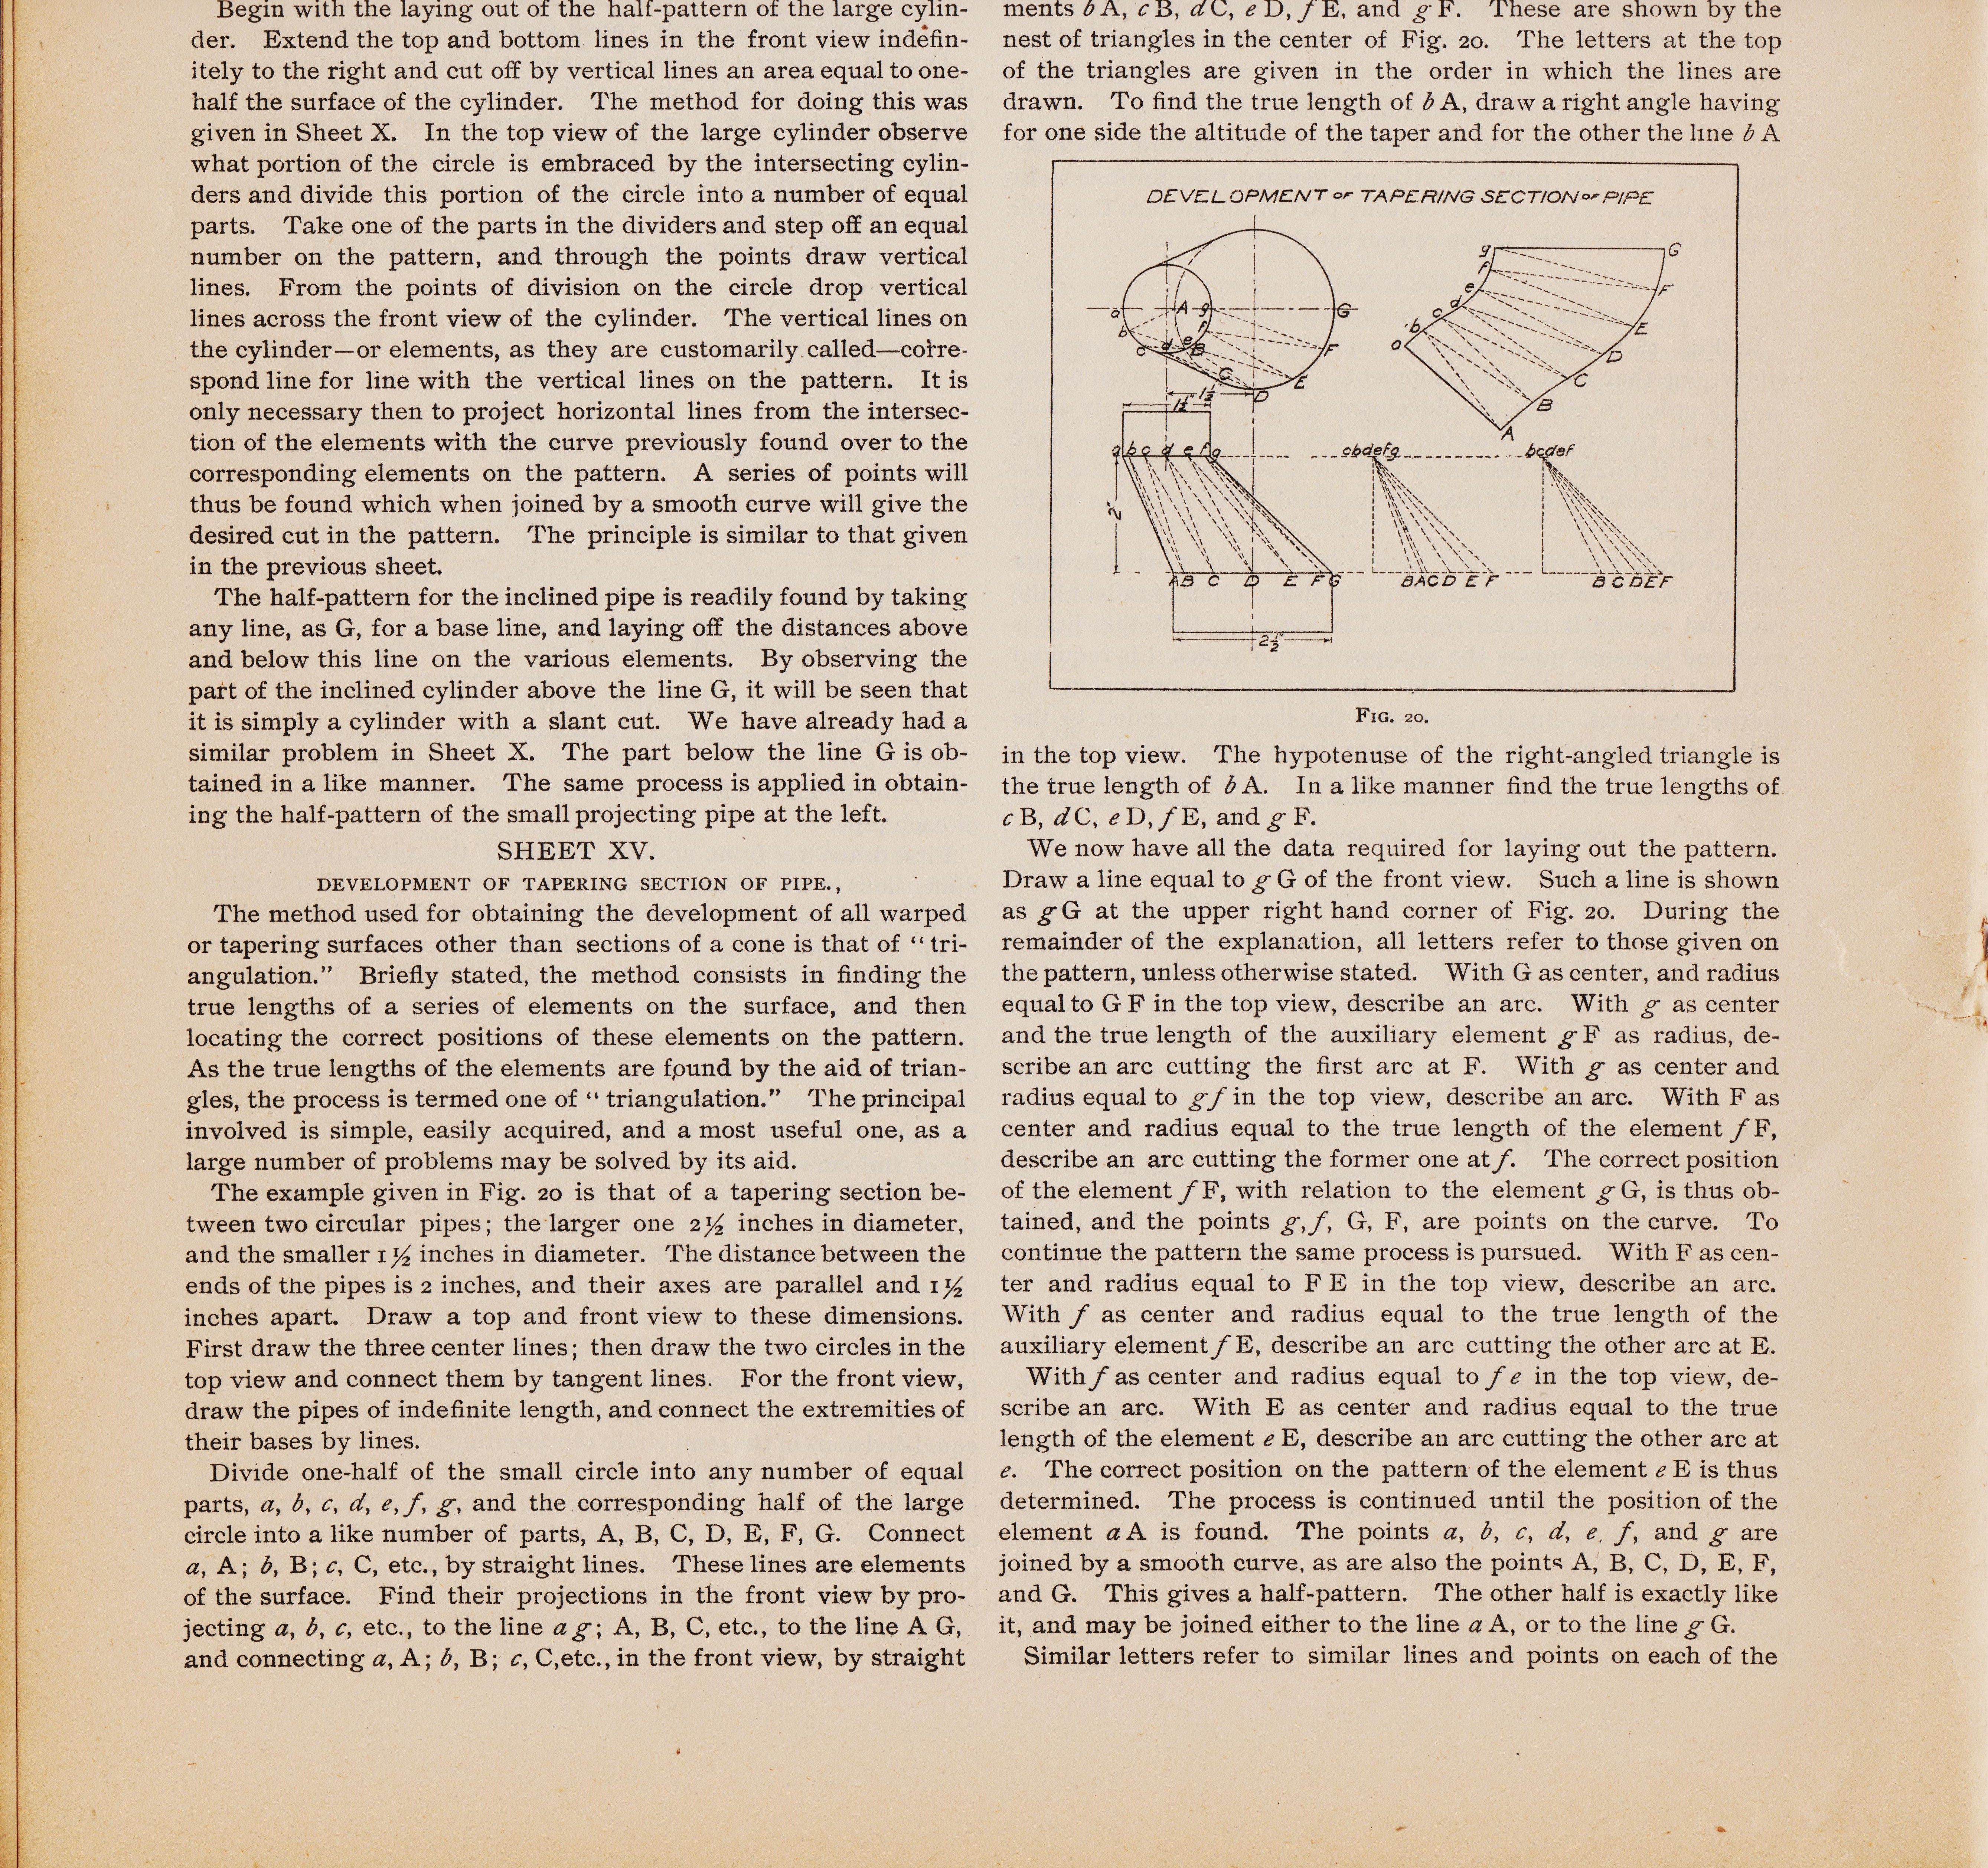 http://antiquemachinery.com/images-2020/Machinery-Magazine-March-1896-vol-2-no-7-page-204-bot-Mechanical-drawing-Circular-development-intersection-layout.jpg